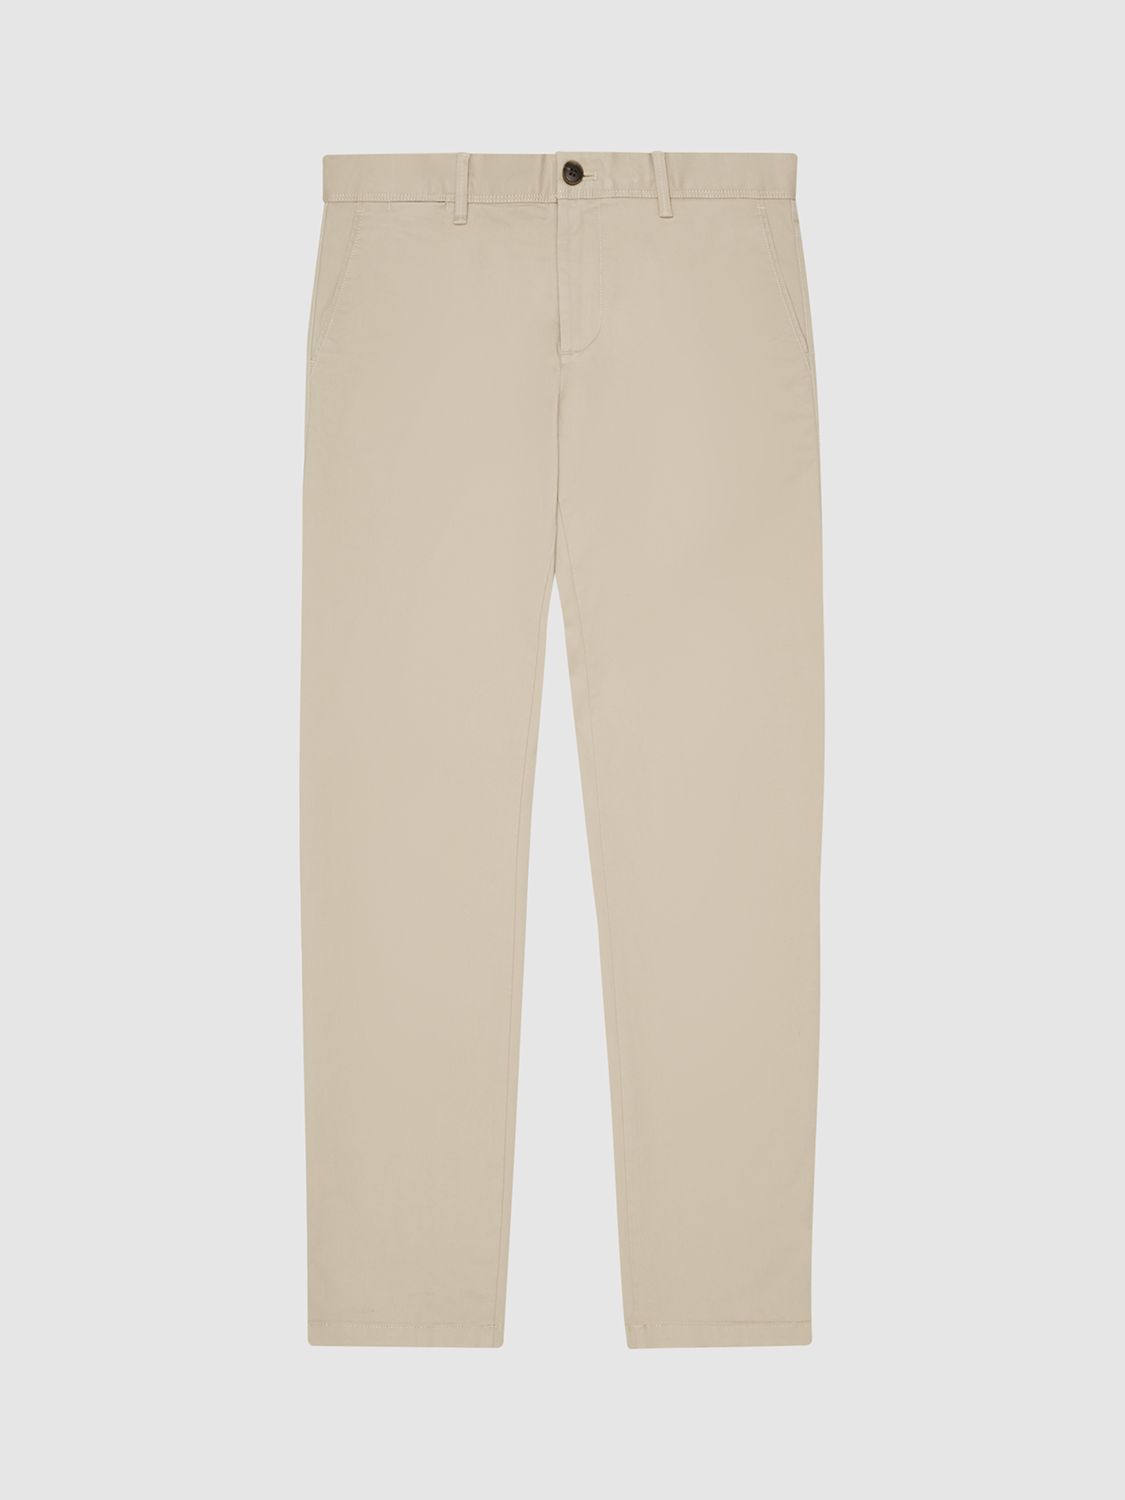 Reiss Pitch Chino Trousers, Stone at John Lewis & Partners